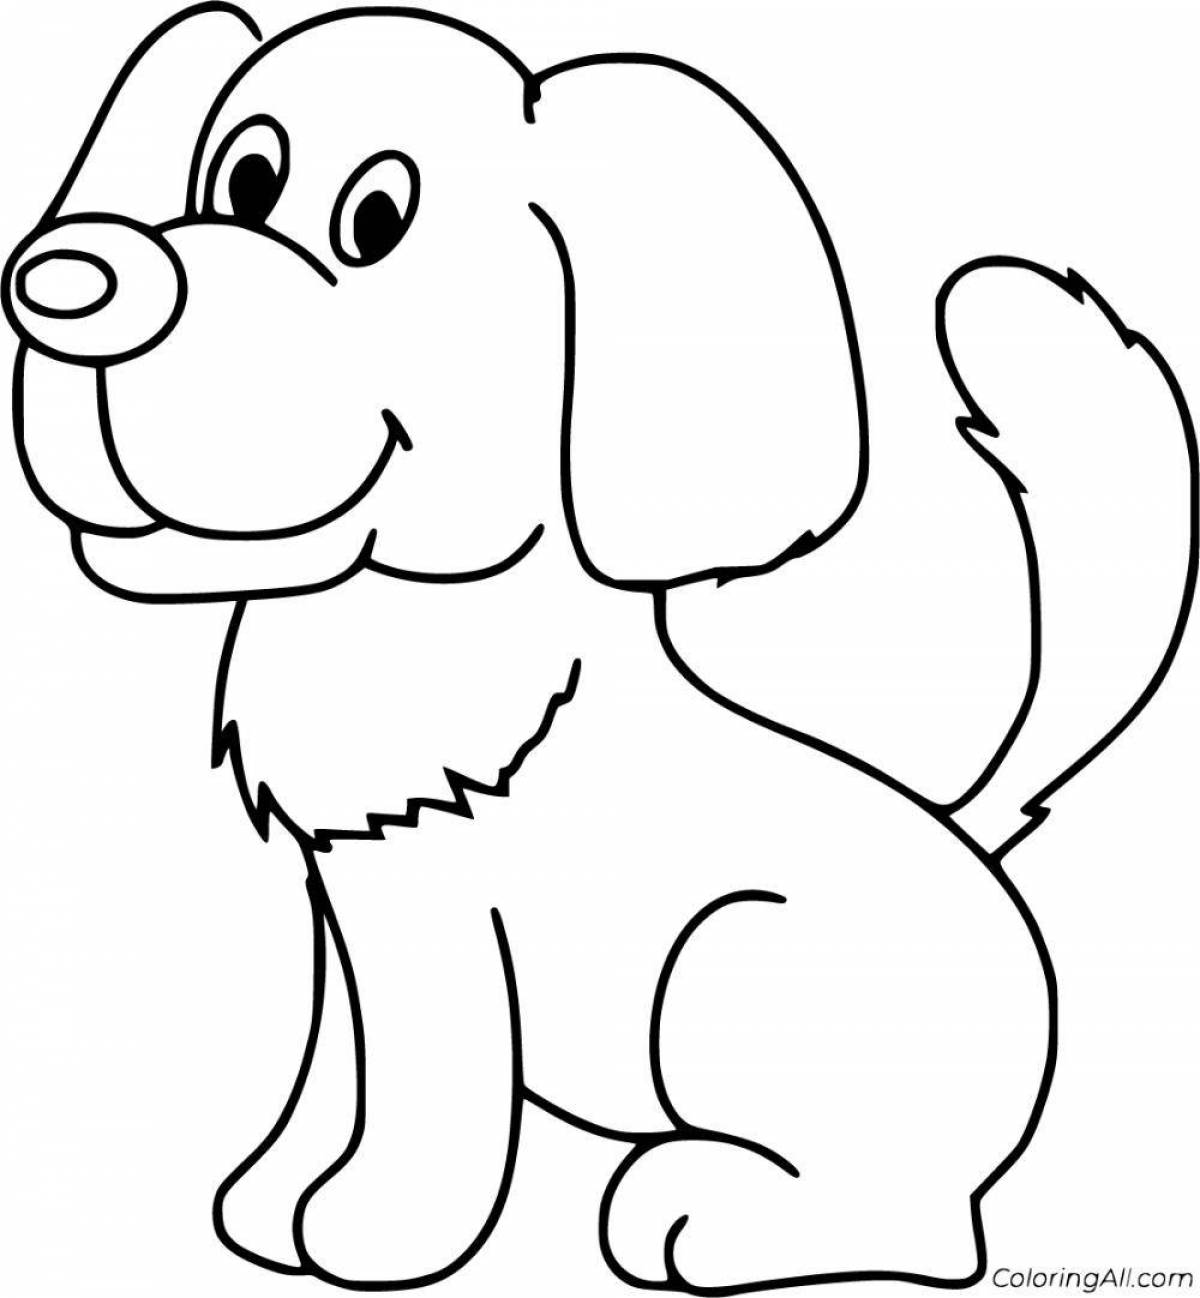 Coloring book shining dog for kids